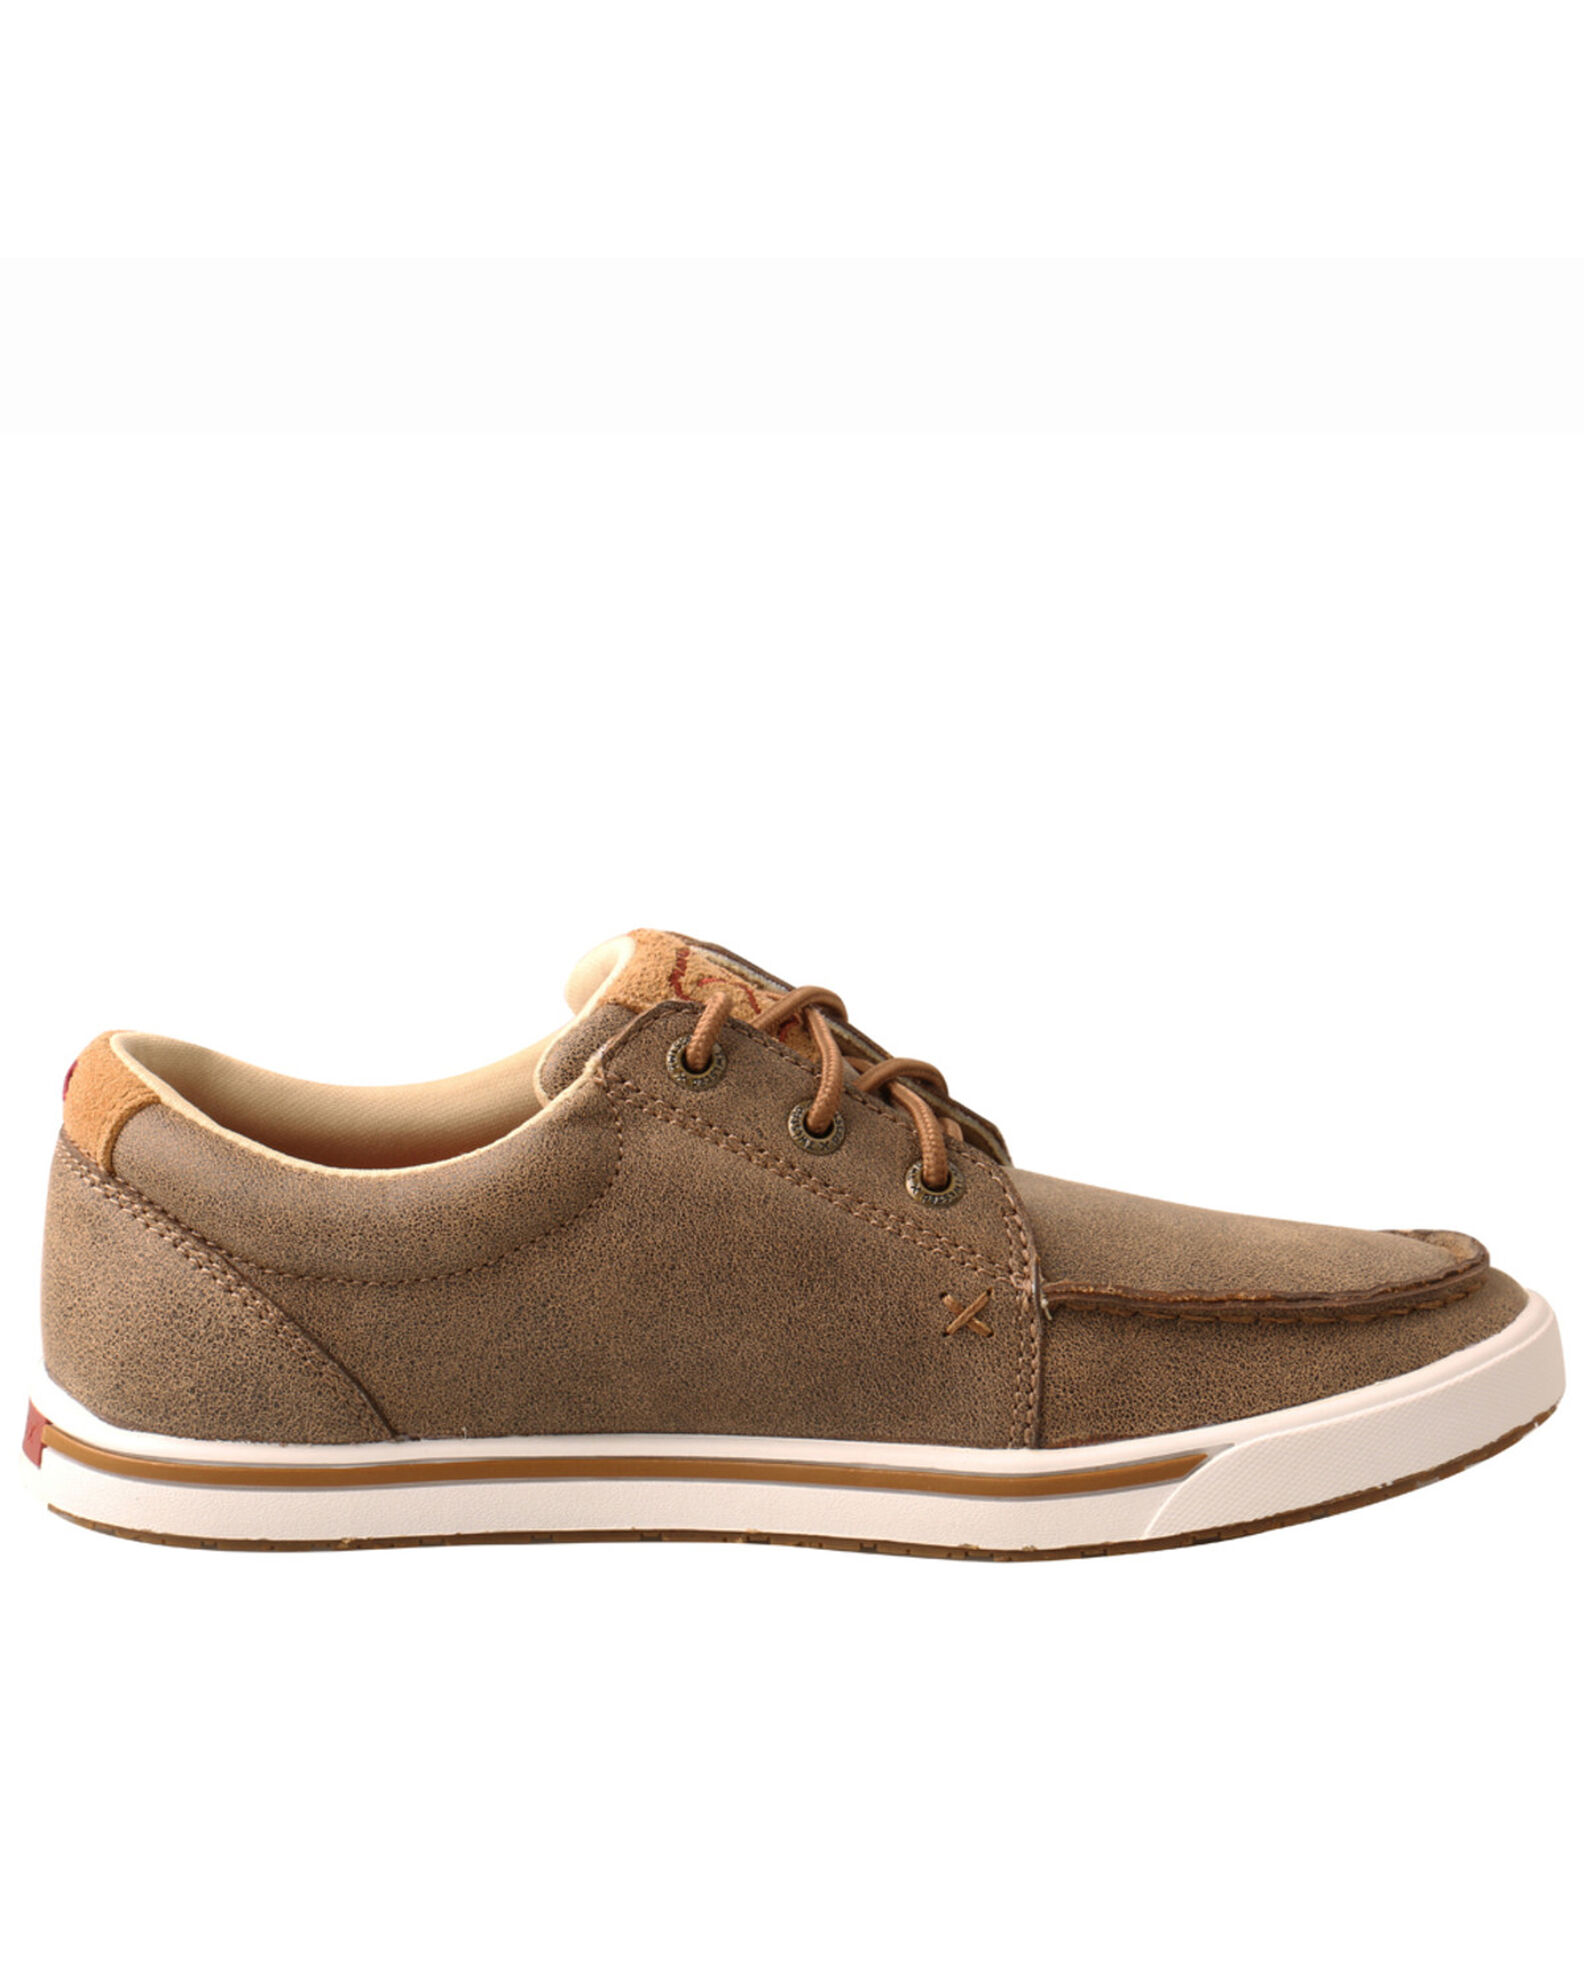 Twisted X Women's Sunflower Casual Shoes - Moc Toe